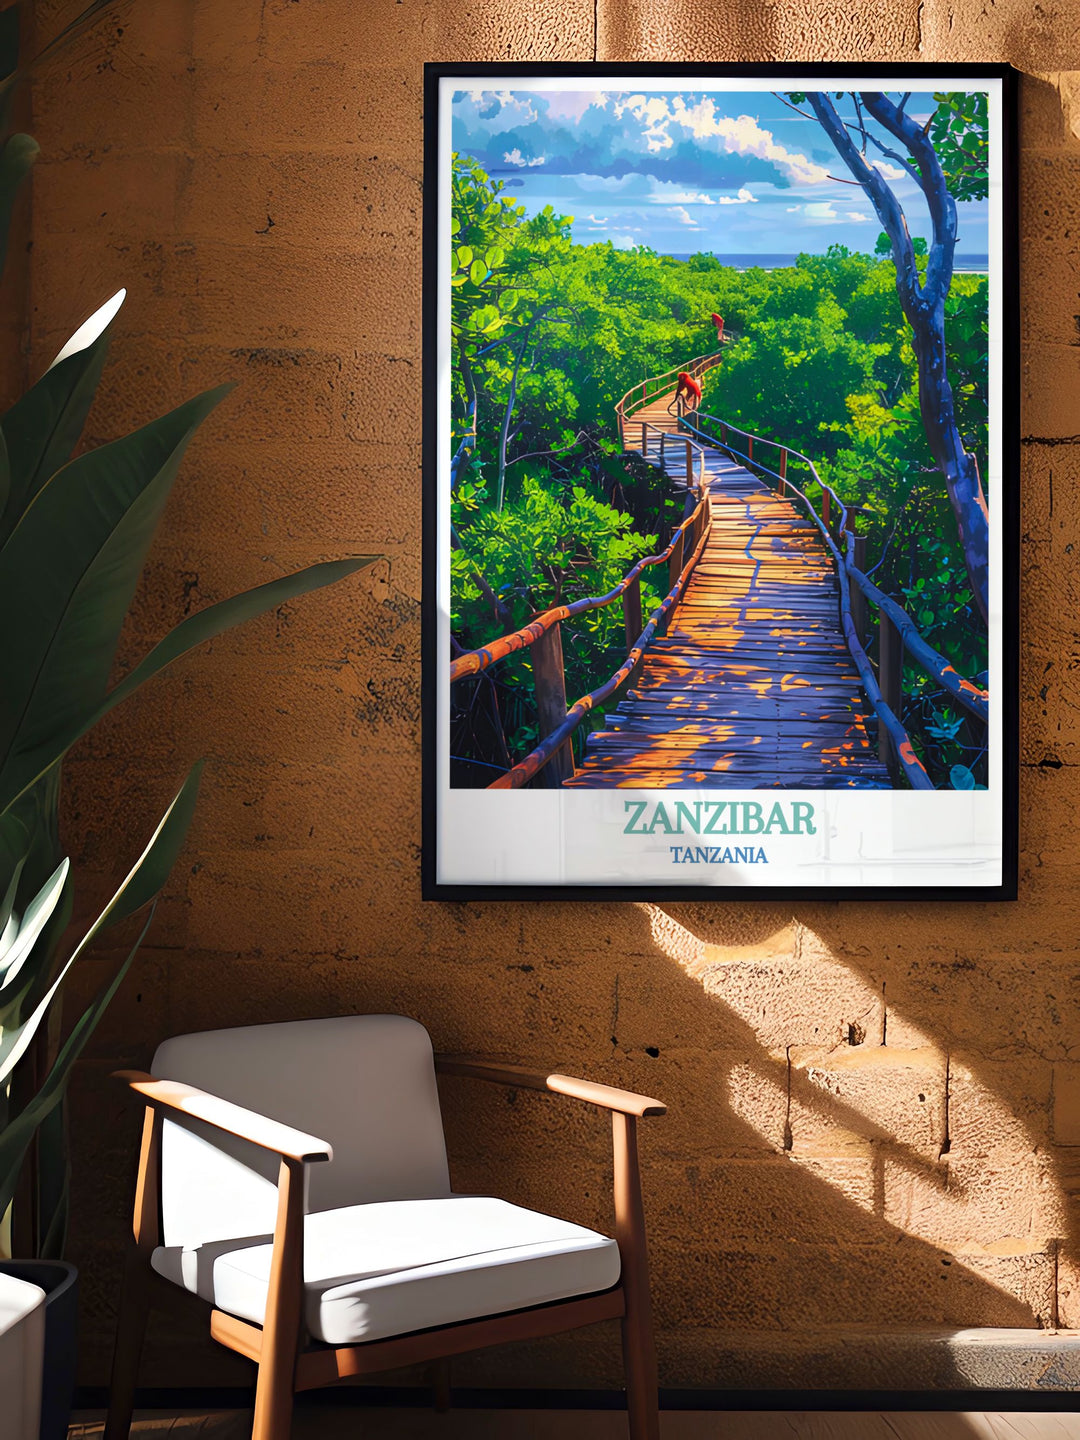 Eye catching Jozani Forest poster featuring the stunning scenery of Zanzibar perfect for adding a vibrant and natural touch to your home decor with prints that capture the essence of the forests beauty and tranquility.